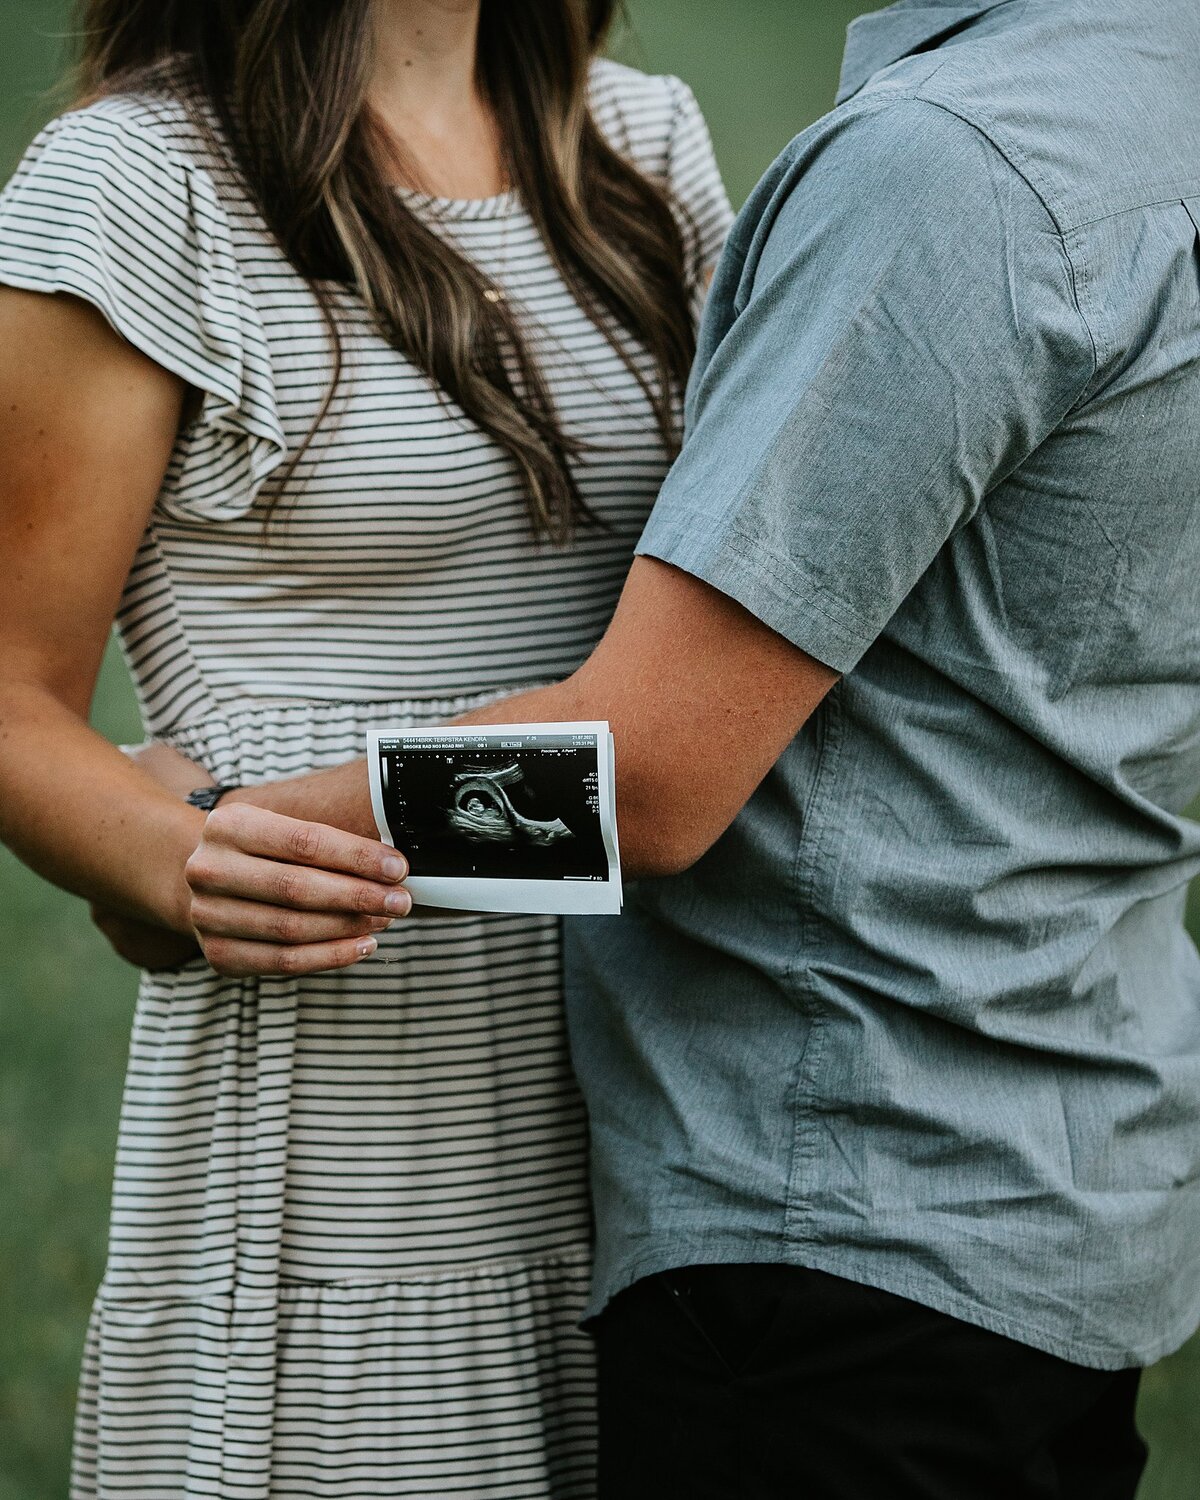 Maternity session announcement